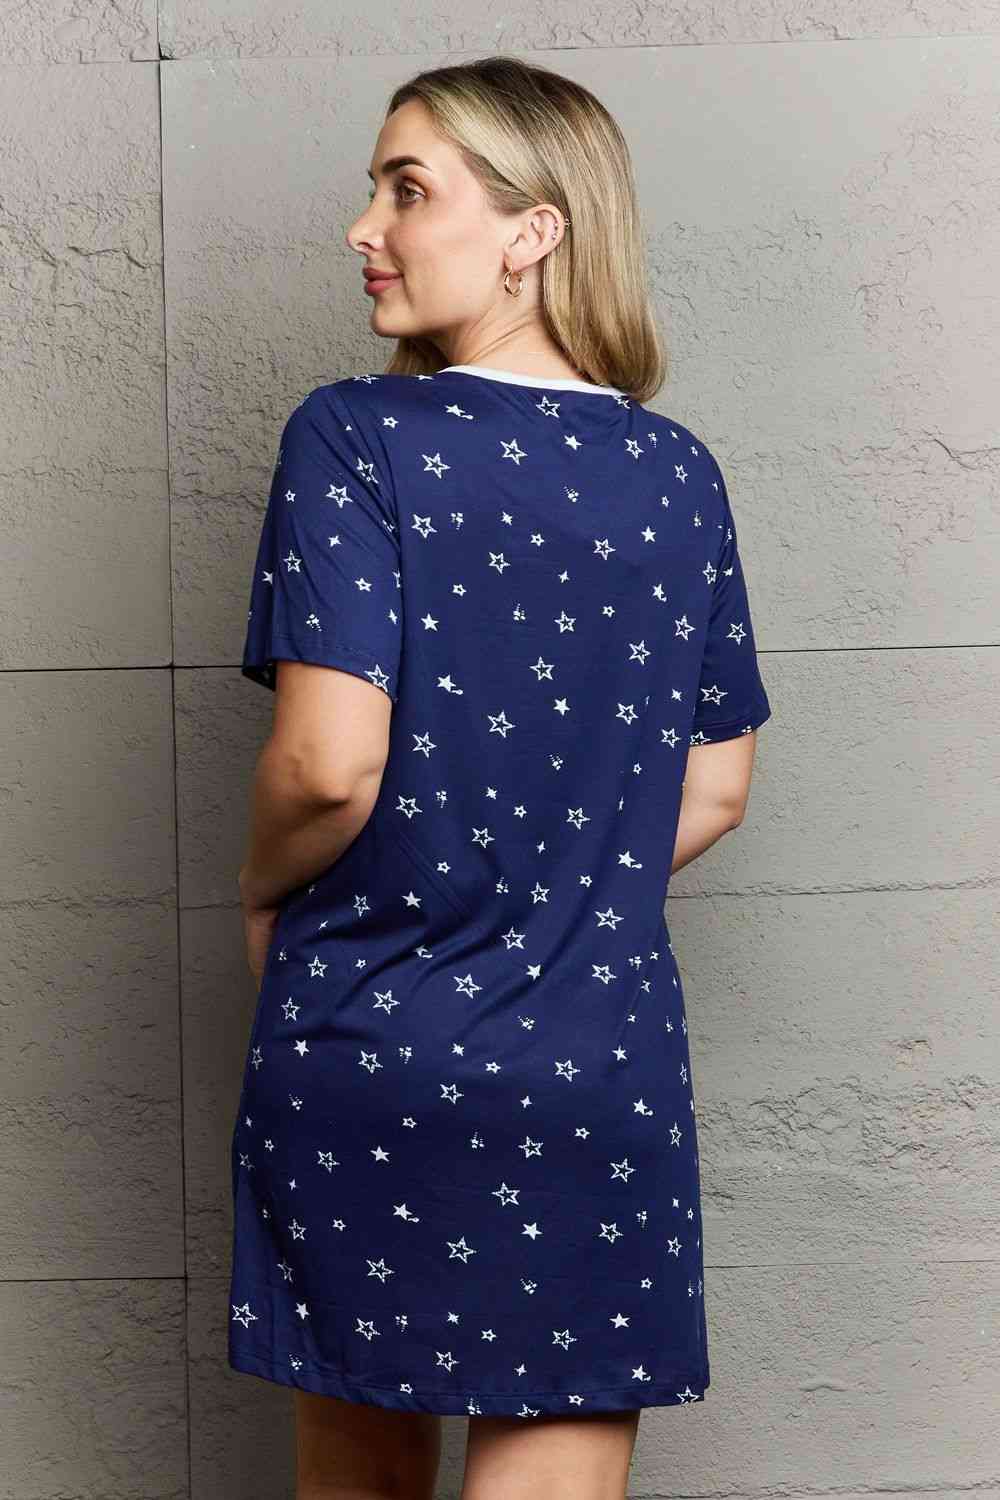 Dark Gray MOON NITE Quilted Quivers Button Down Sleepwear Dress Clothing